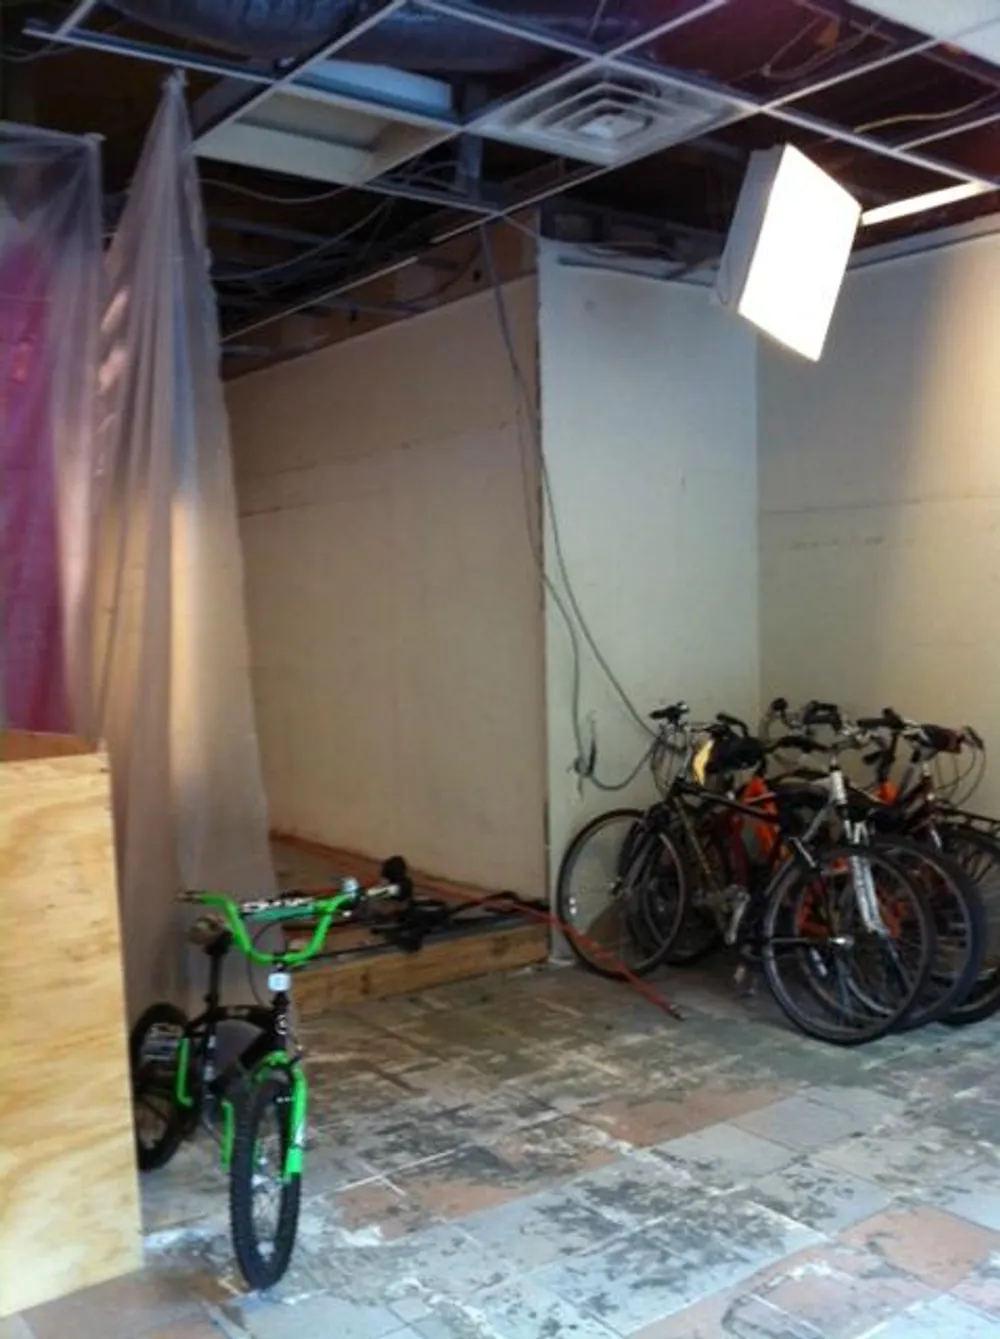 The image shows a cluttered and unfinished interior space with exposed ceiling infrastructure a group of bicycles parked on the right and a solitary green childrens bike in the foreground